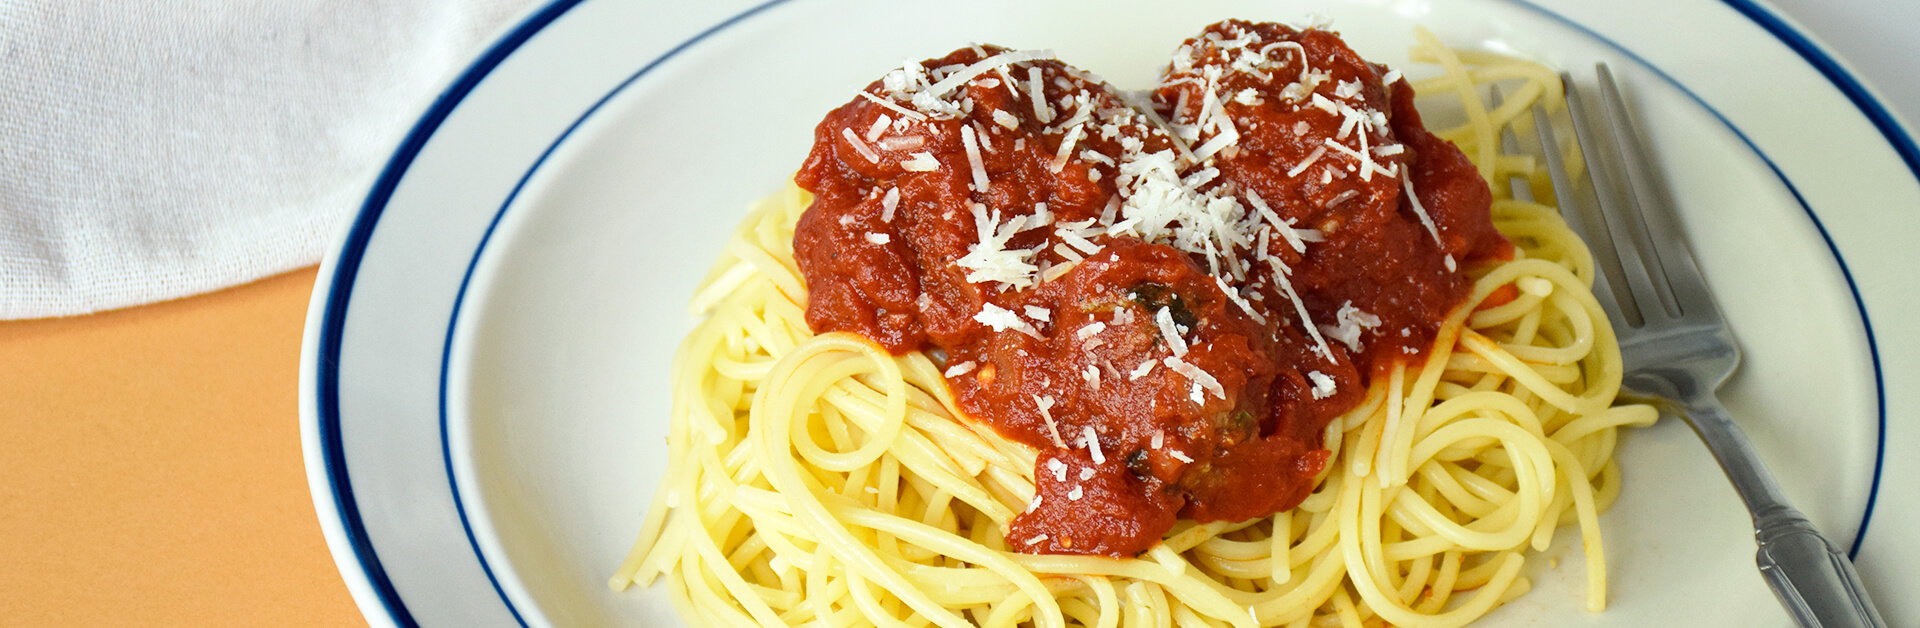 Spaghetti and meatballs on a white plate with blue edges.